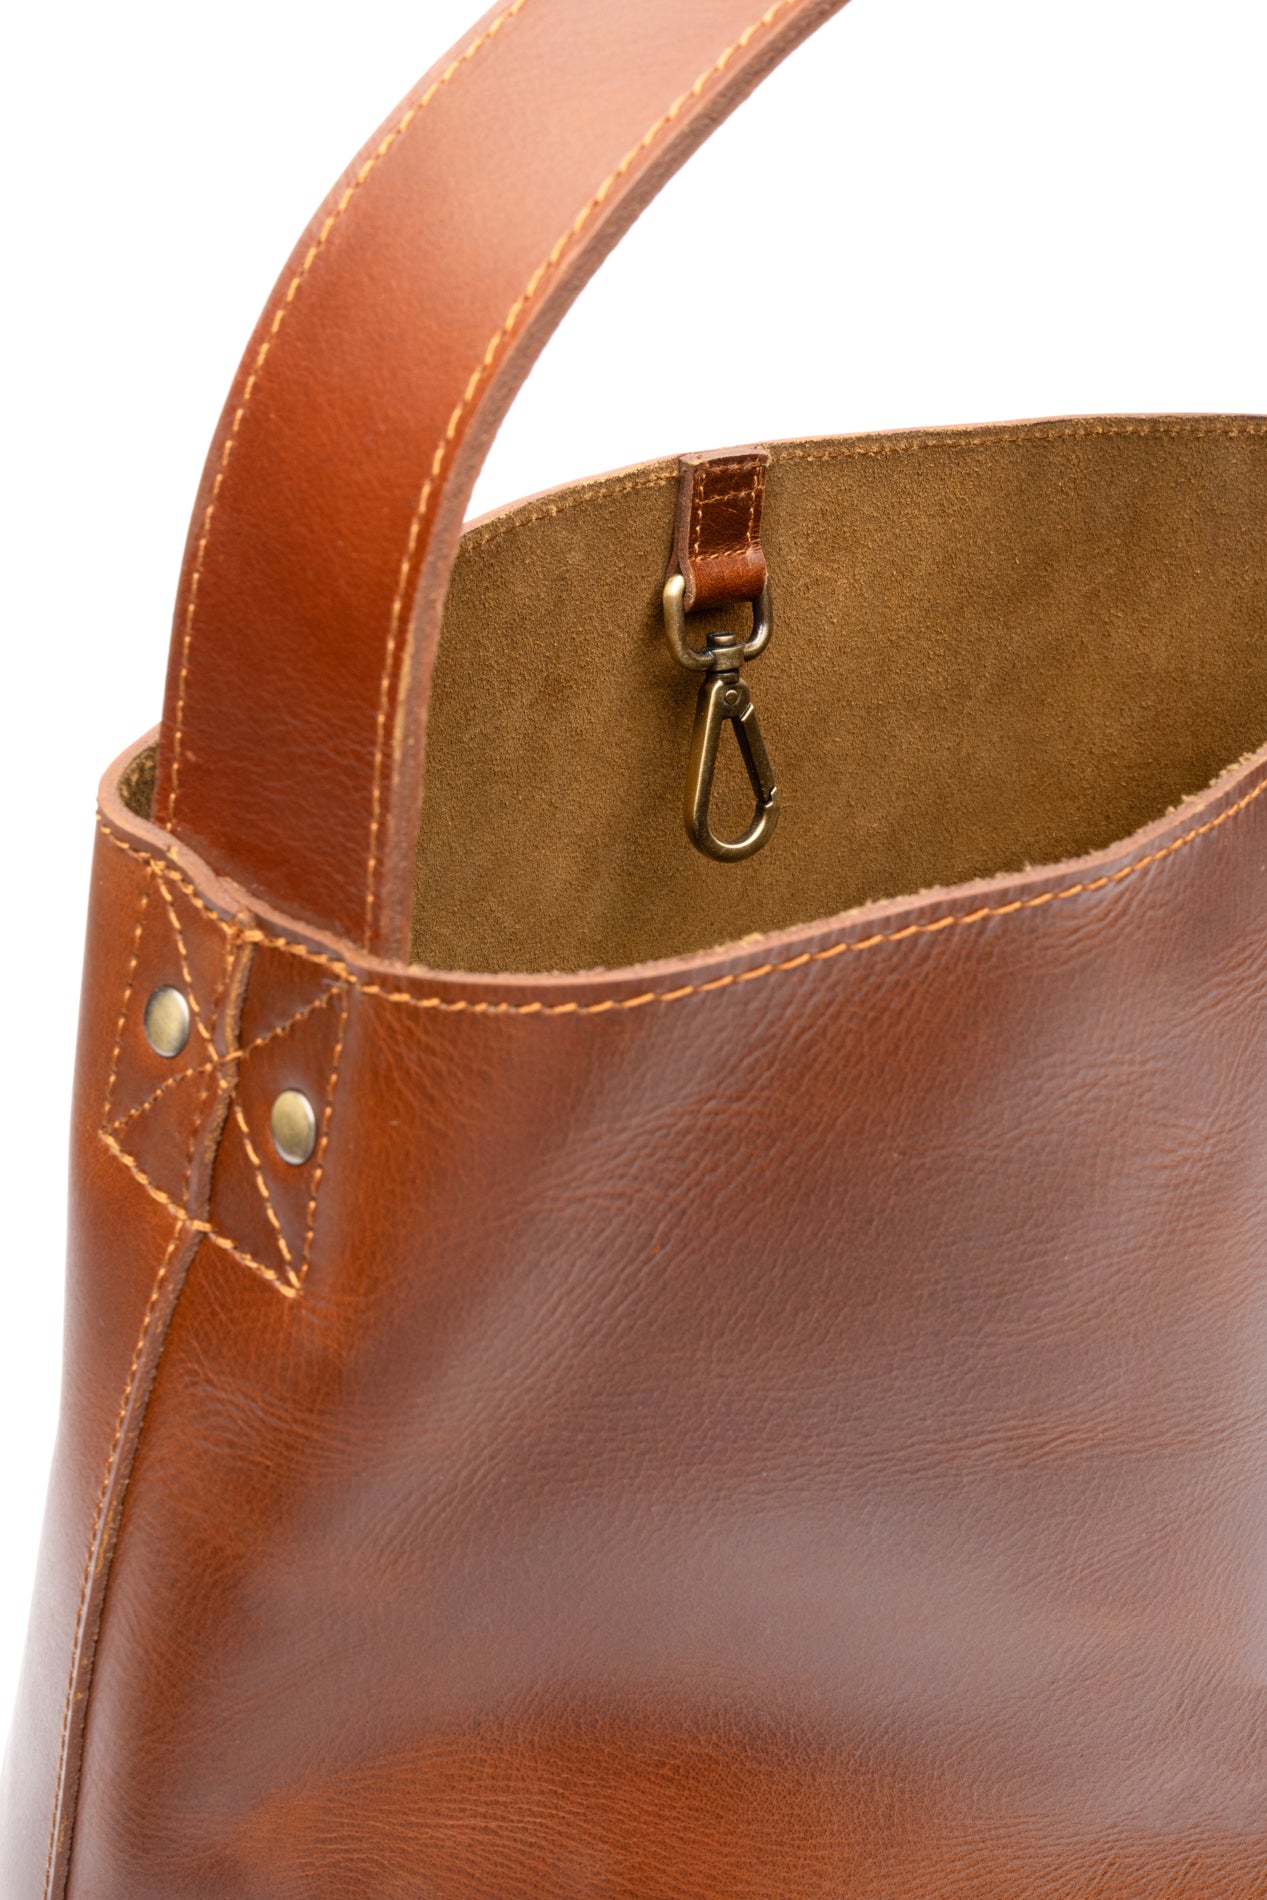 Close up view d-ring interior of Stylish fashionable brown leather tote that is fair trade ethically produced